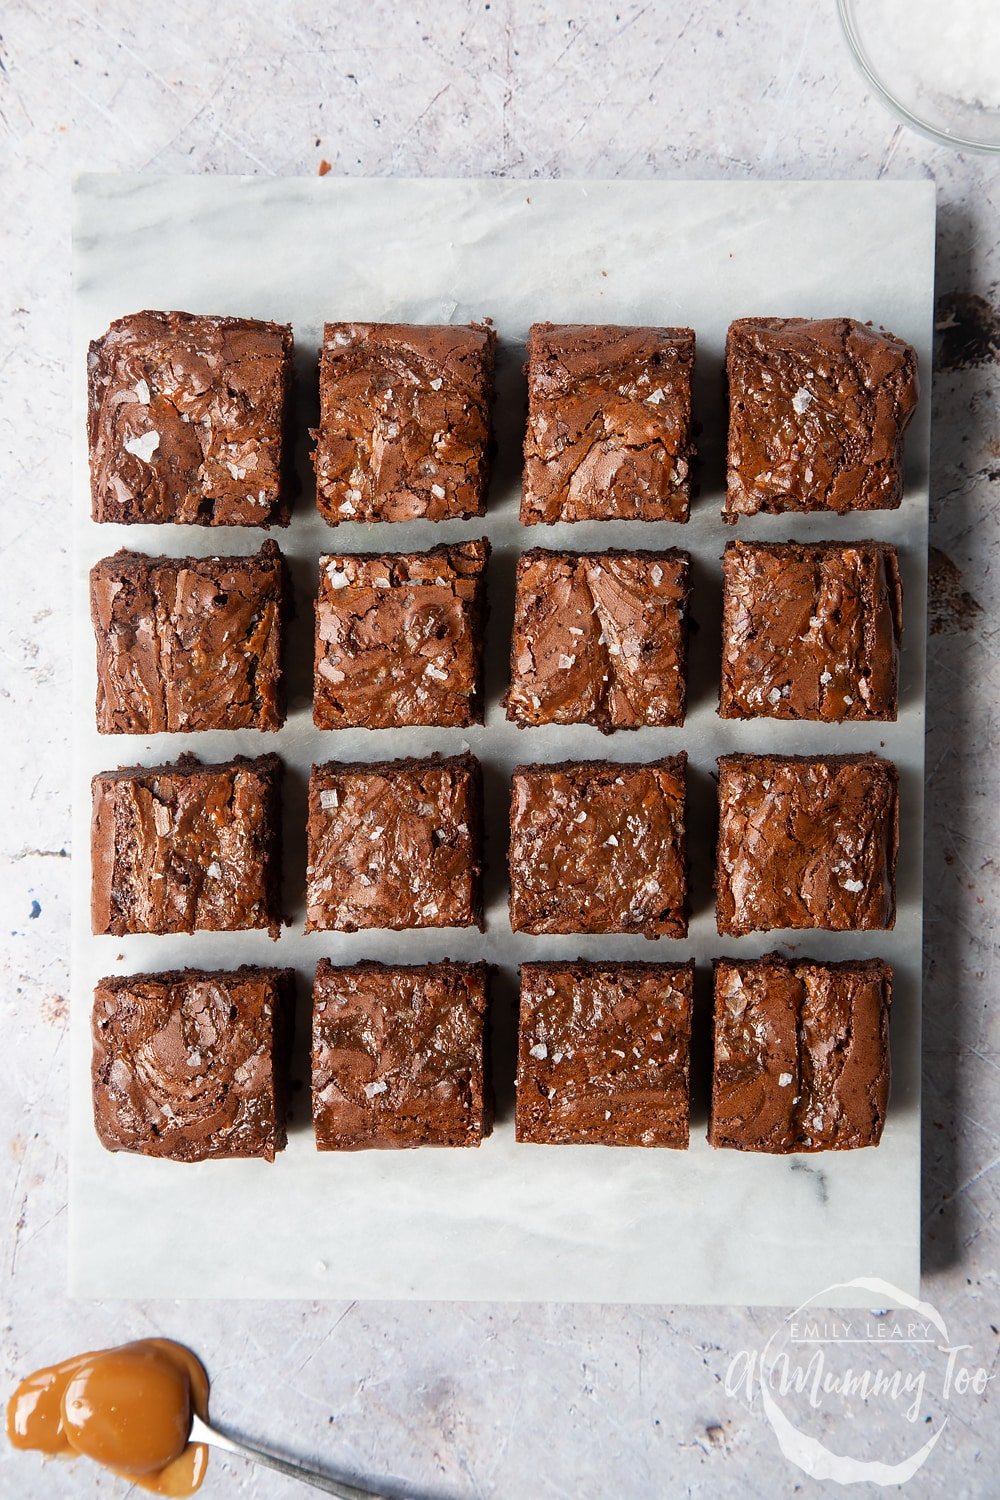 Finished slices of gooey salted caramel brownies ready to be served. 